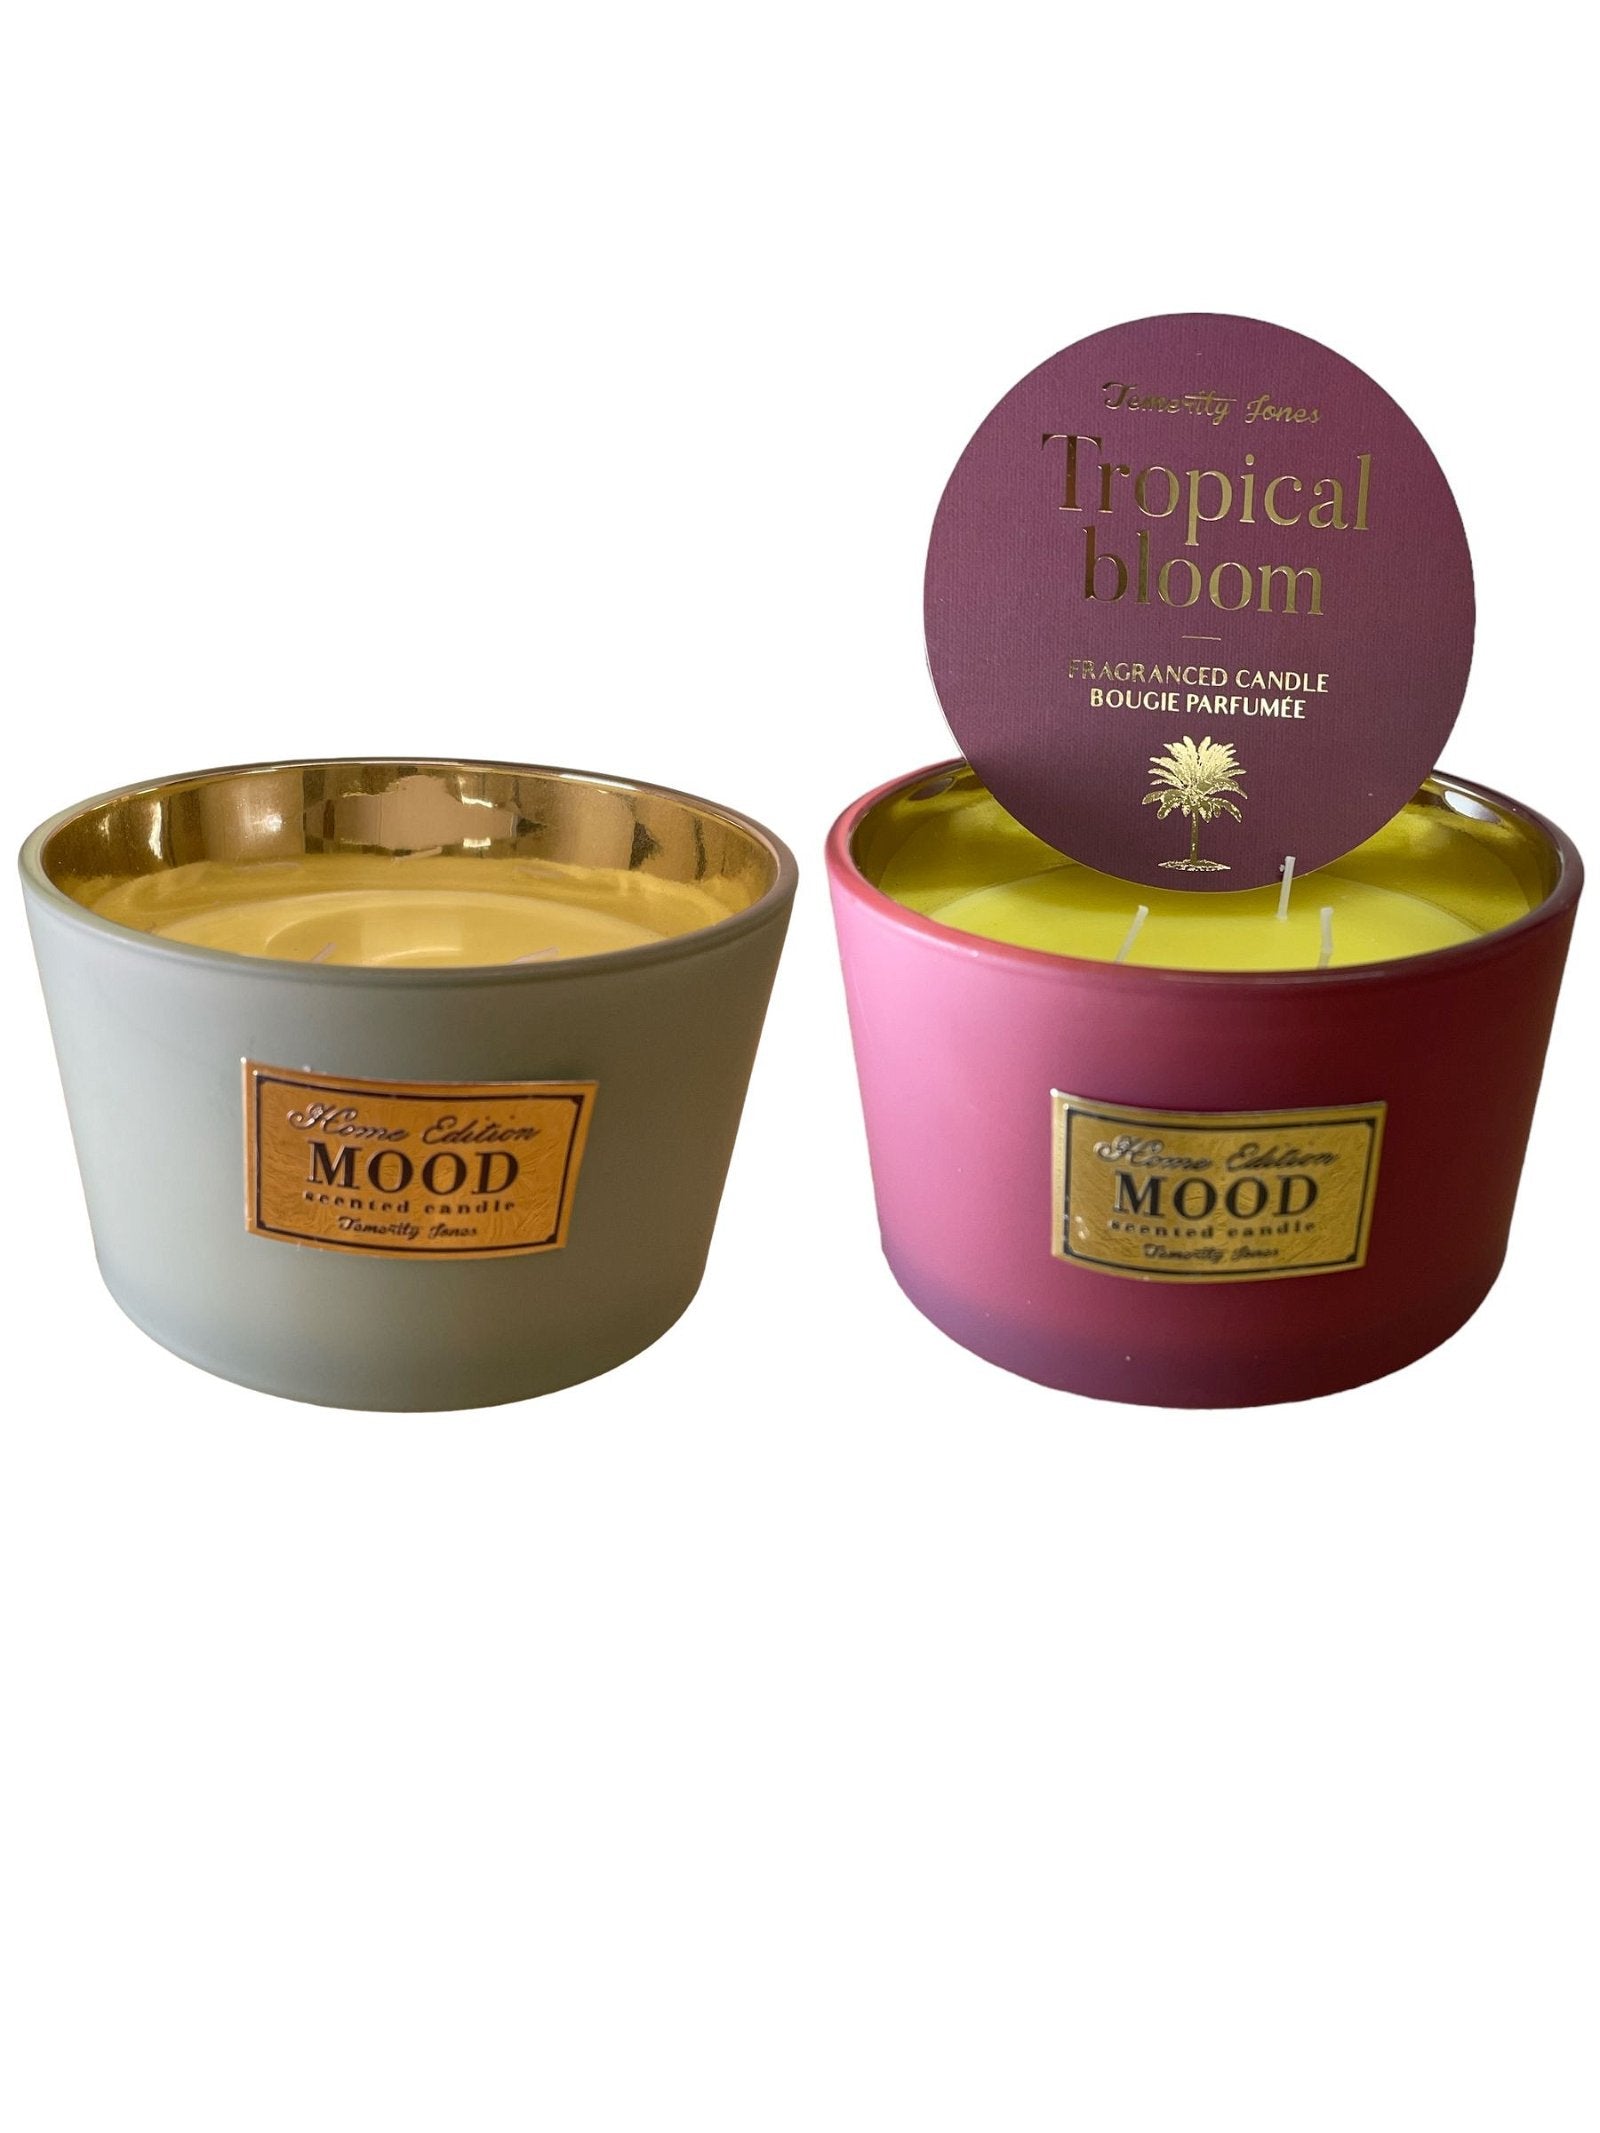 View 3 Wick Scented Candle Pack of 2 information